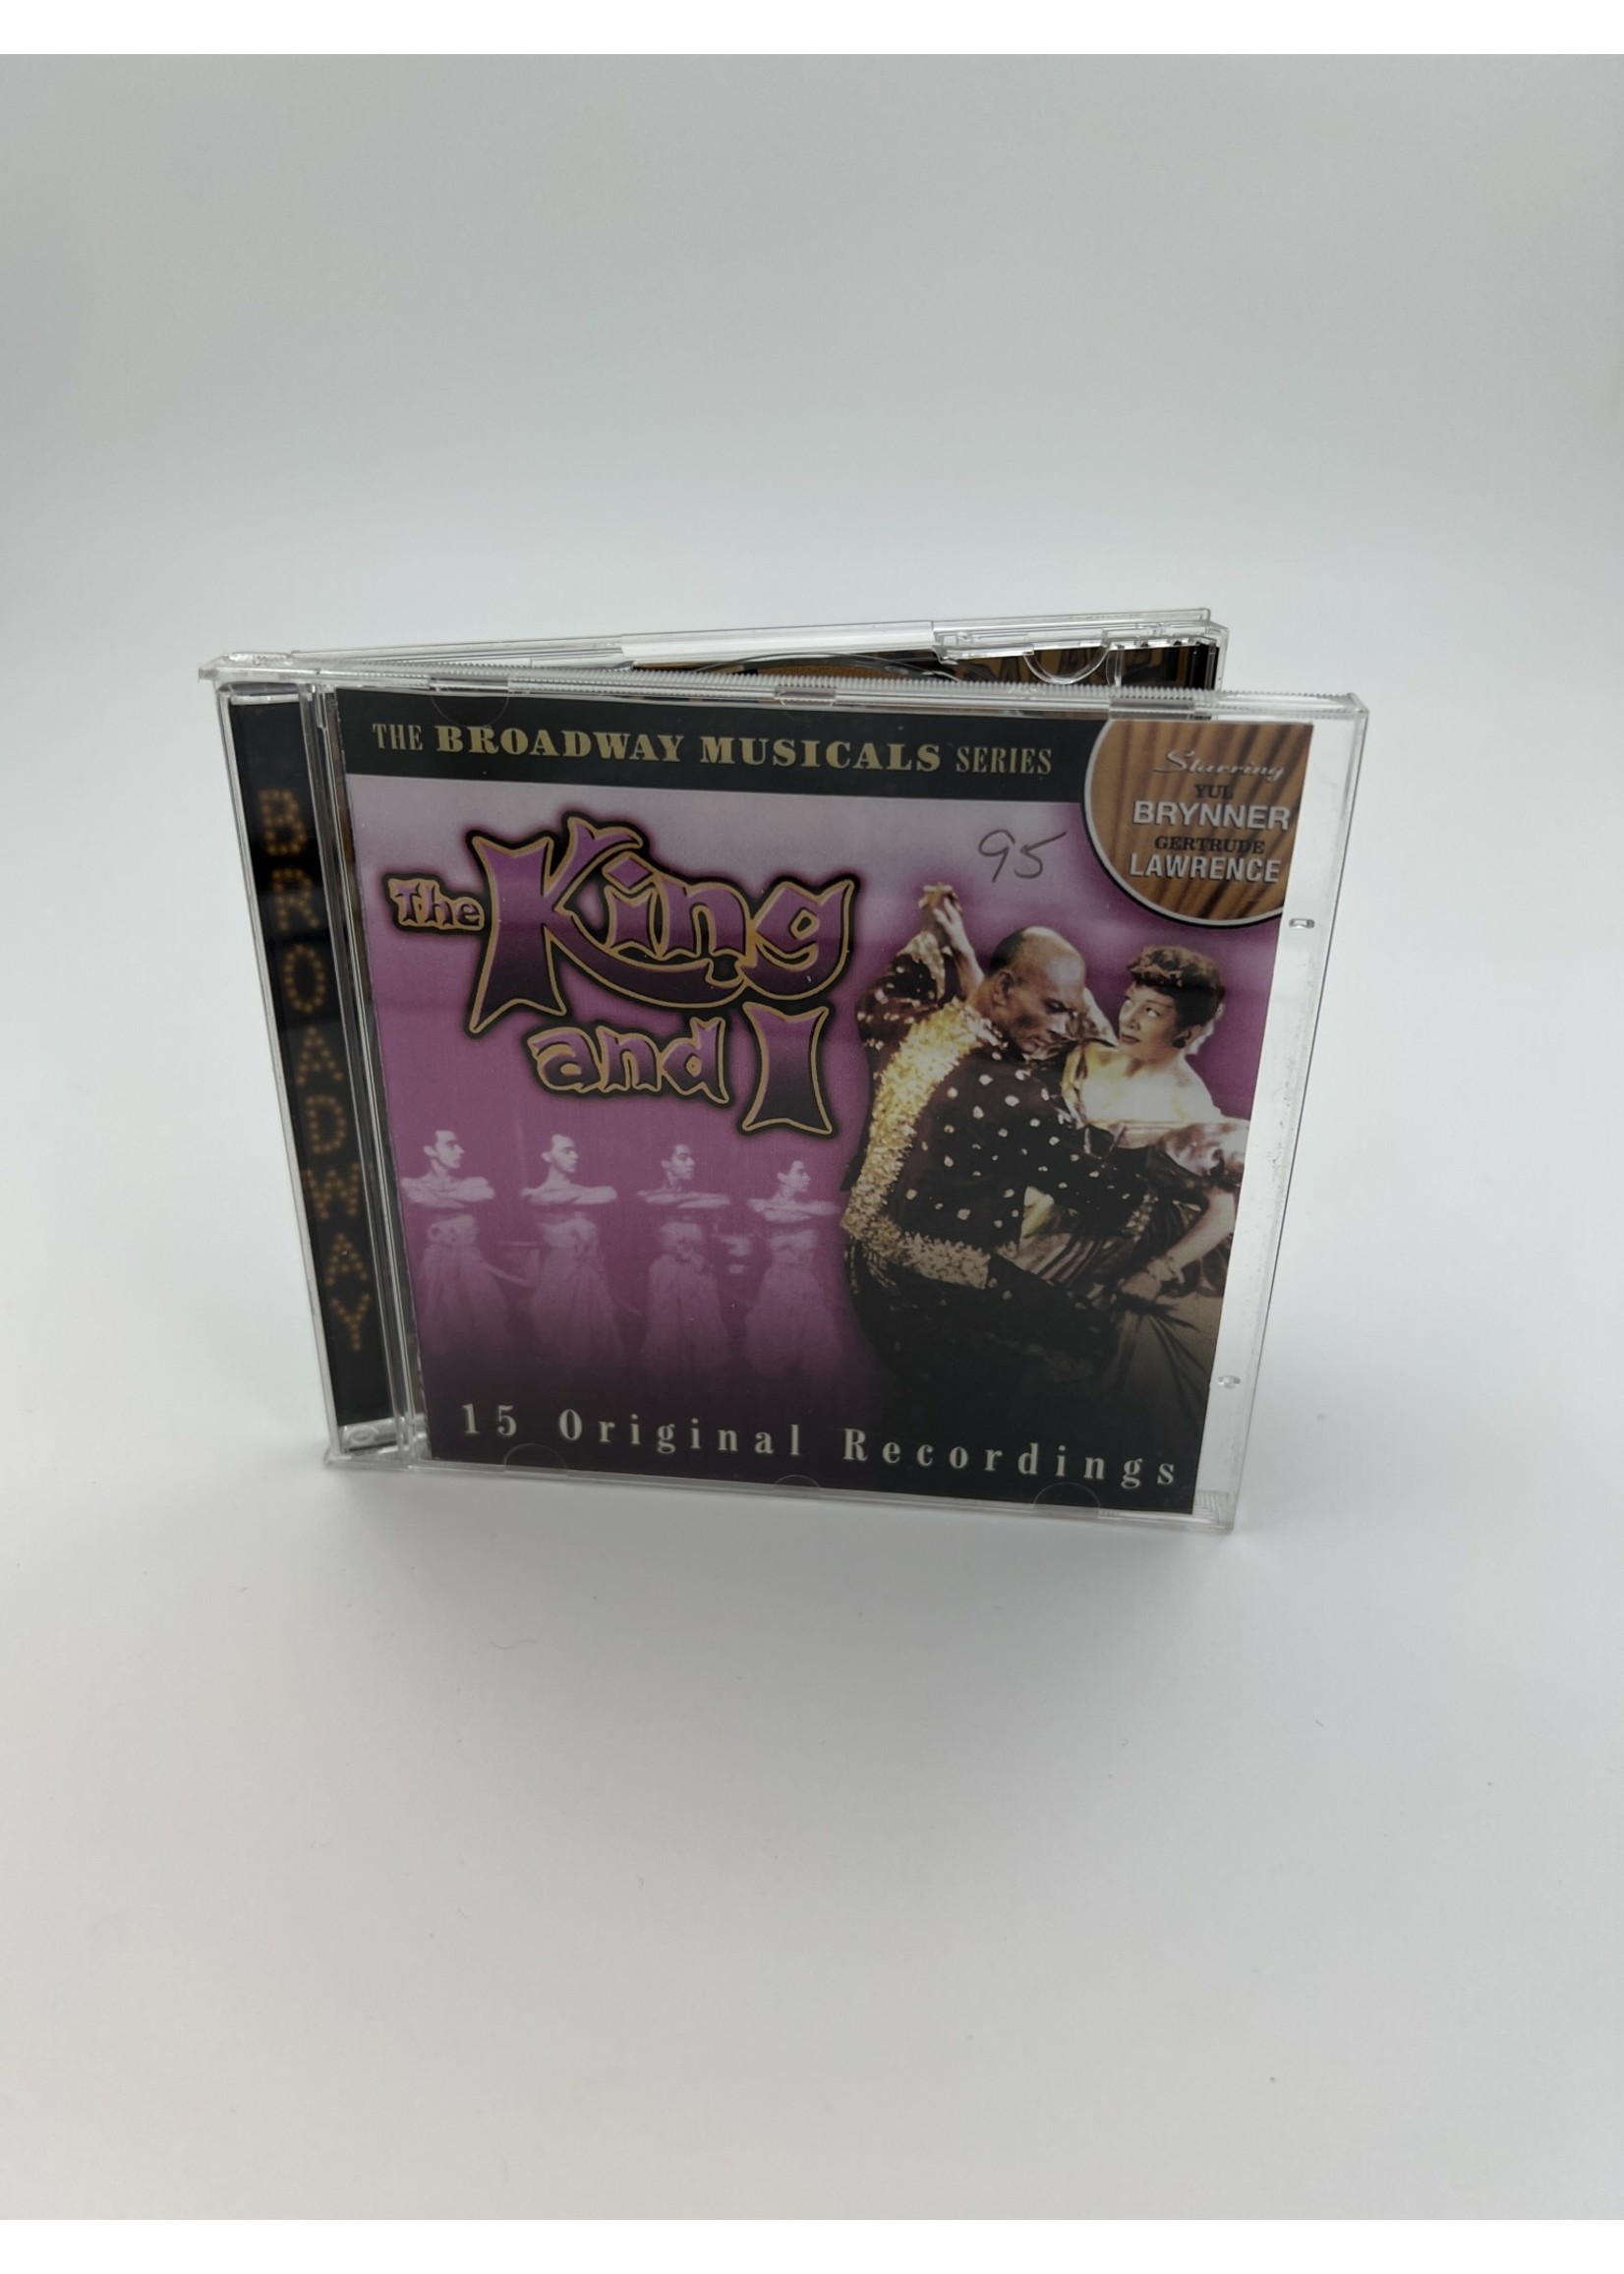 CD The King And I Broadway Musical Series Cd